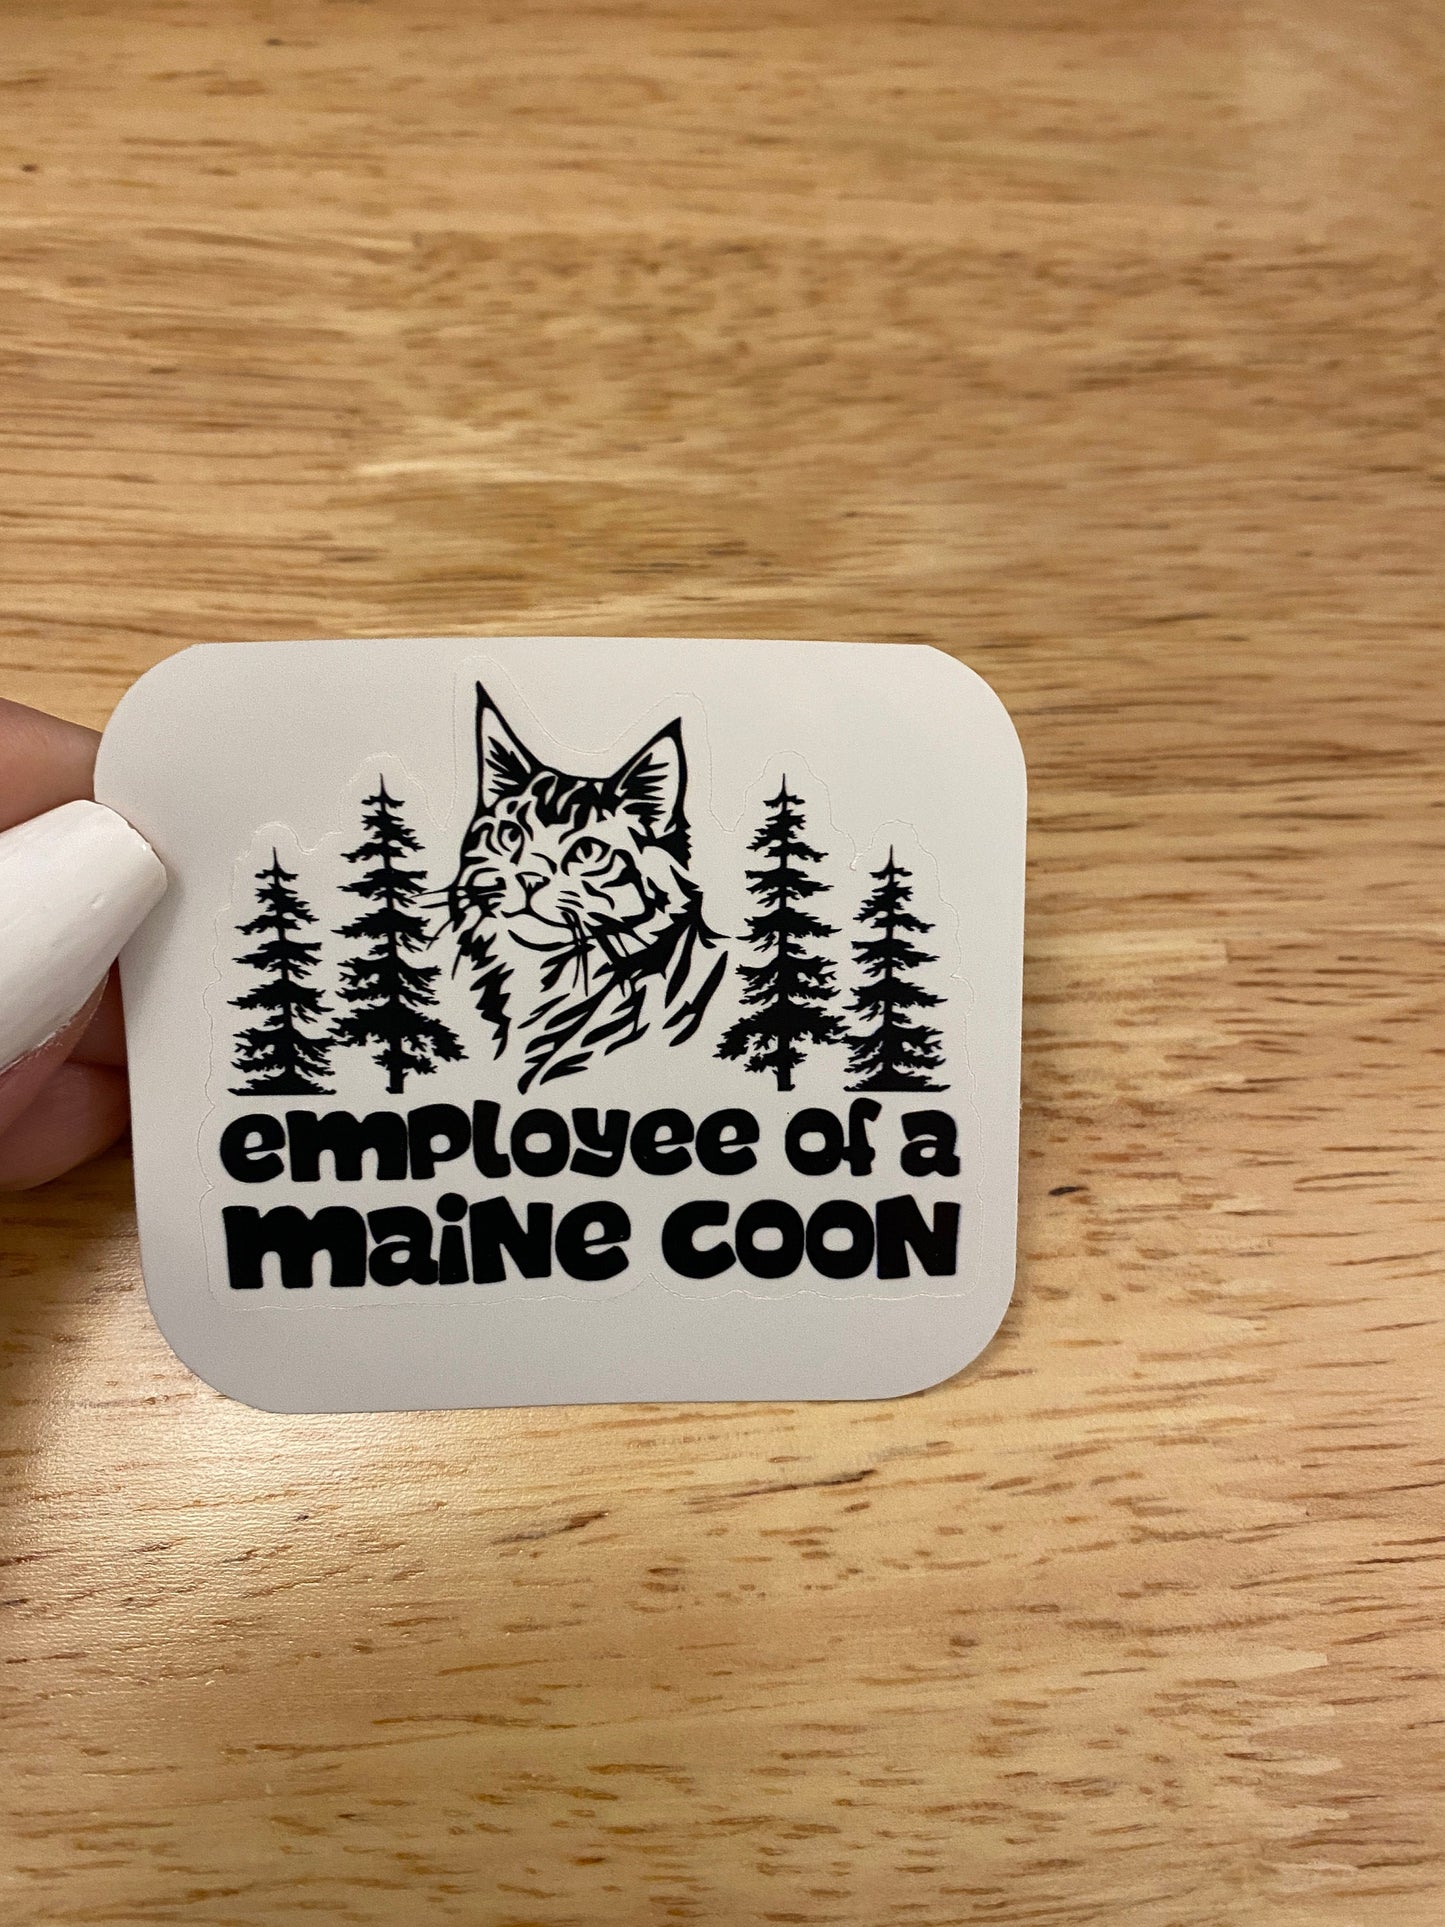 Employee of a Maine Coon Sticker, Maine Coon Employee sticker, Maine Coon Sticker, Dad sticker, Cat Dad sticker, mom sticker, cat mom